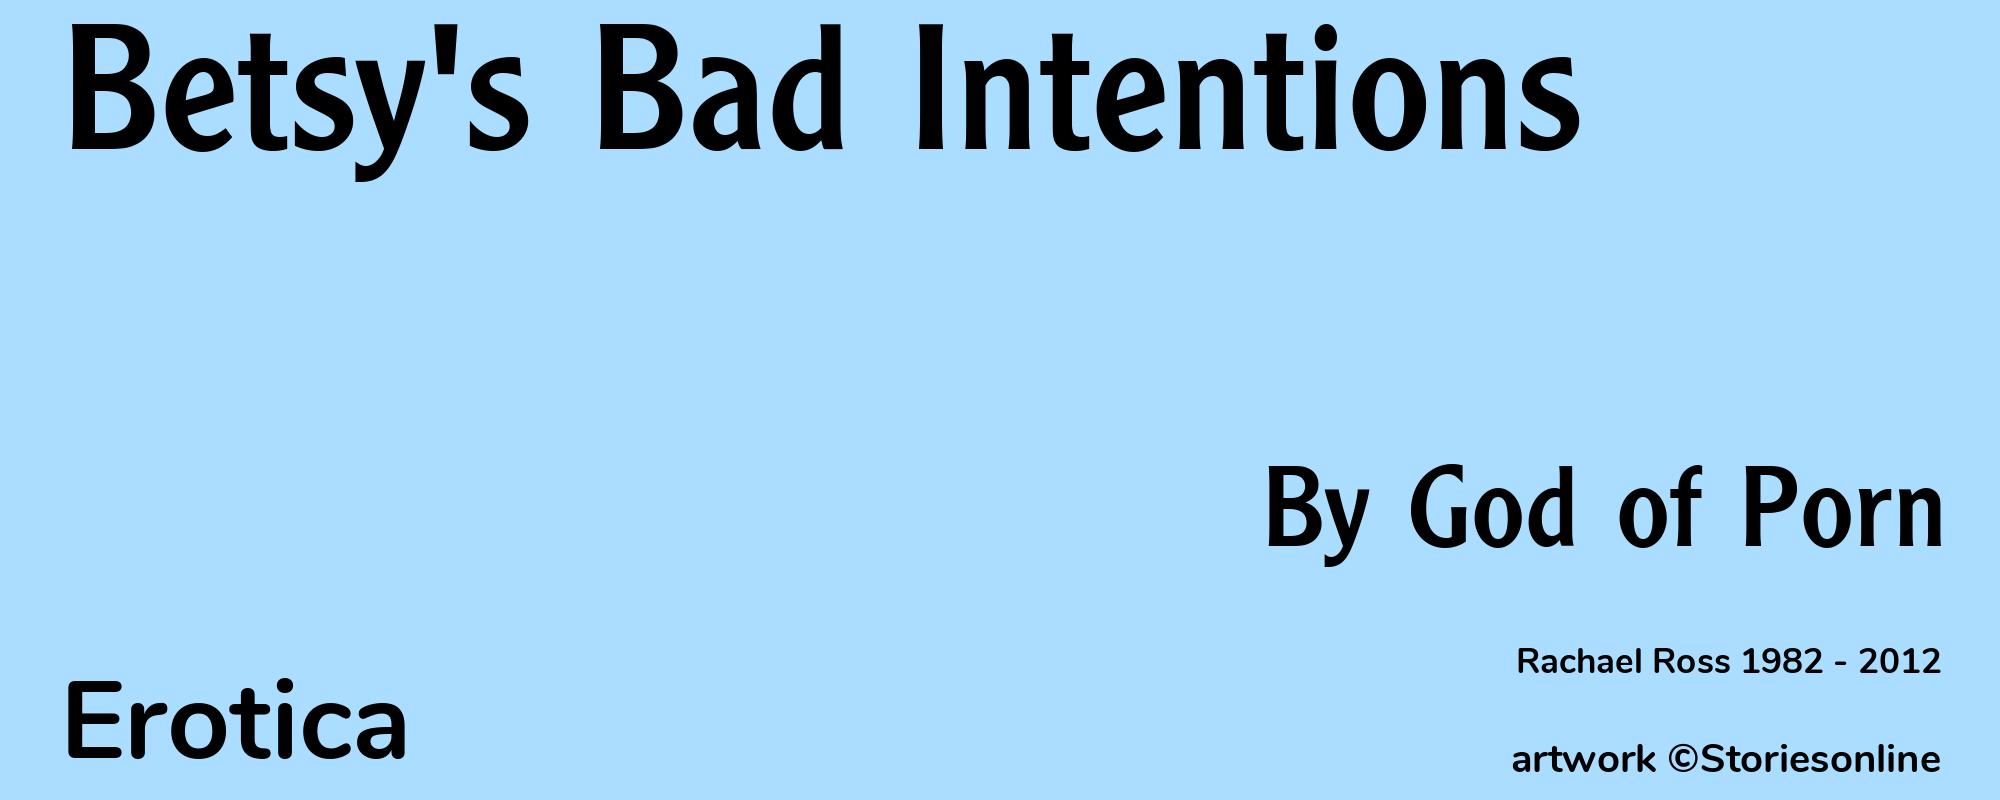 Betsy's Bad Intentions - Cover